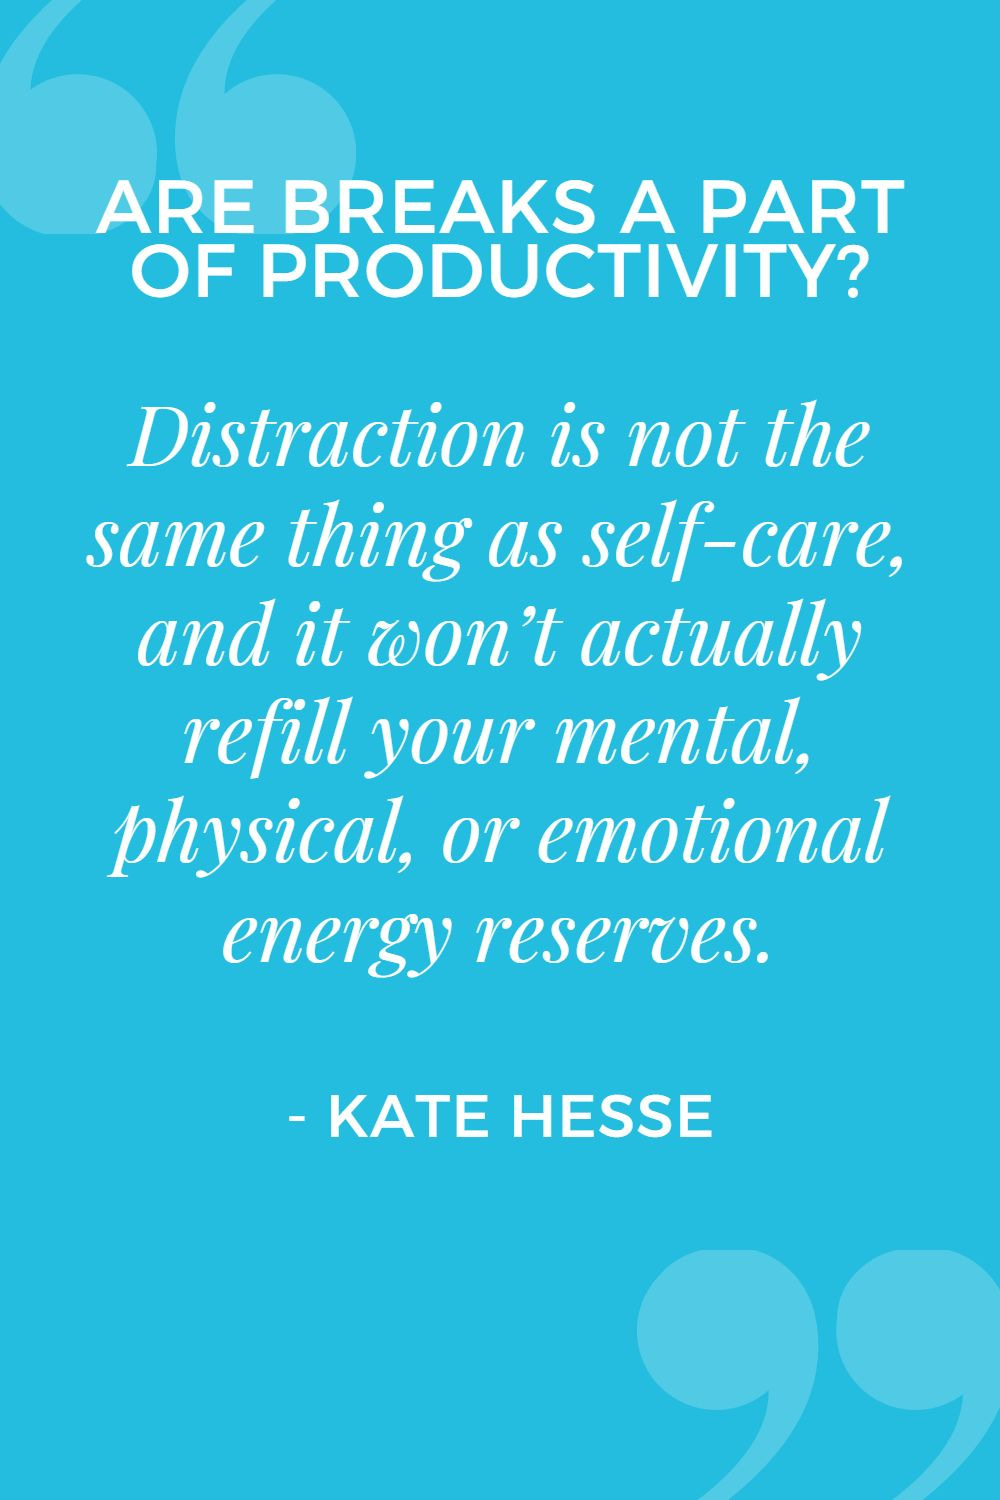 Distraction is not the same thing as self-care and it won't actually refill your mental, physical, or emotional energy reserves.